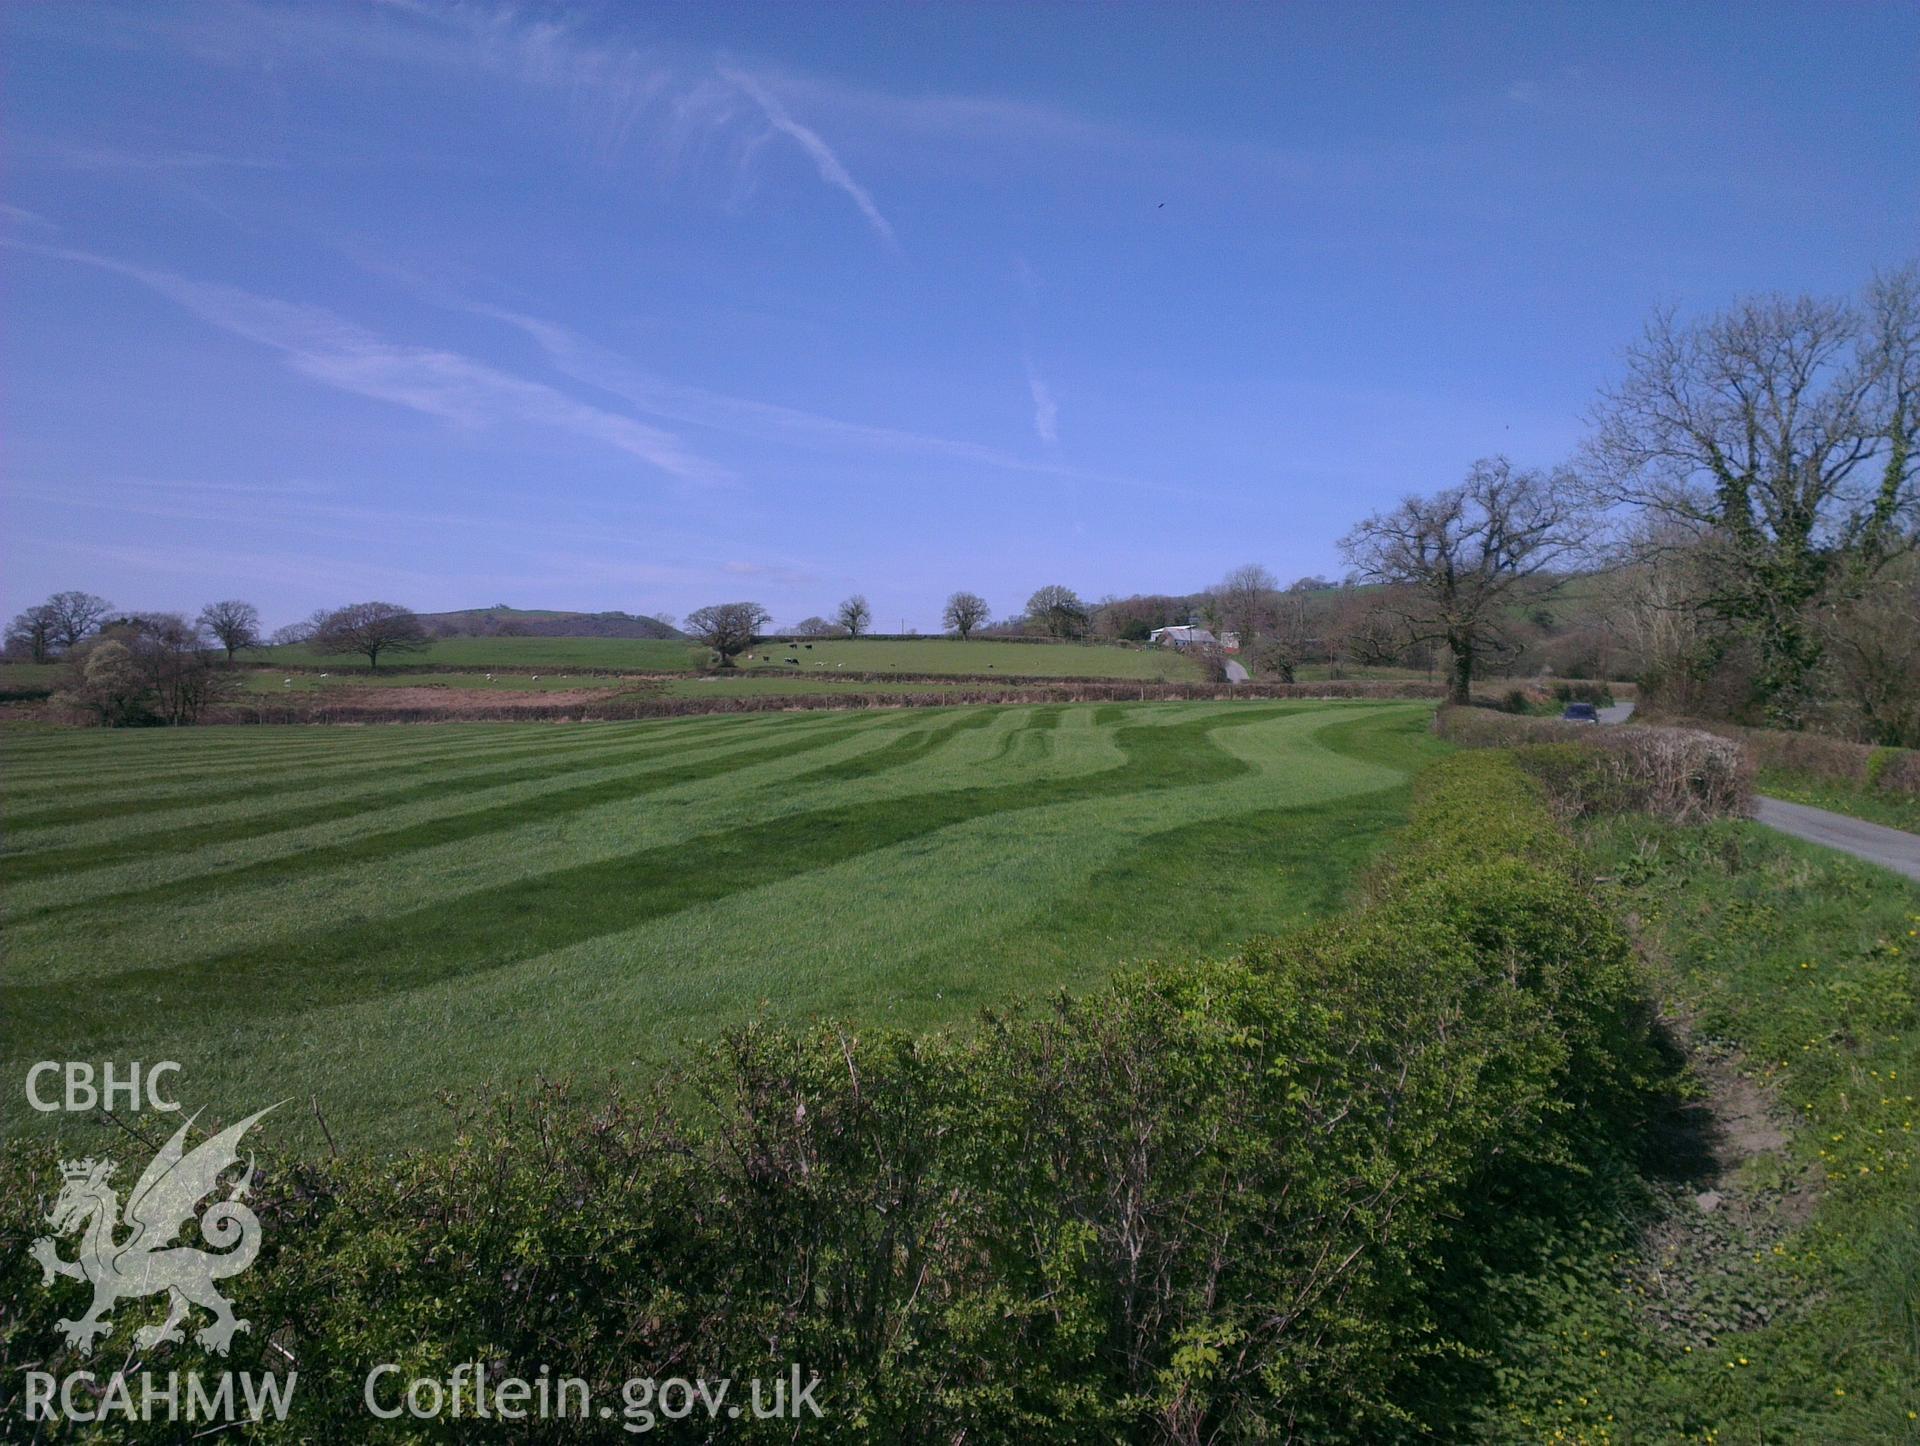 Digital colour photograph of the Coed Llathen battlefield. Photographed during Phase Three of the Welsh Battlefield Metal Detector Survey, carried out by Archaeology Wales, 2012-2014. Project code: 2041 - WBS/12/SUR.